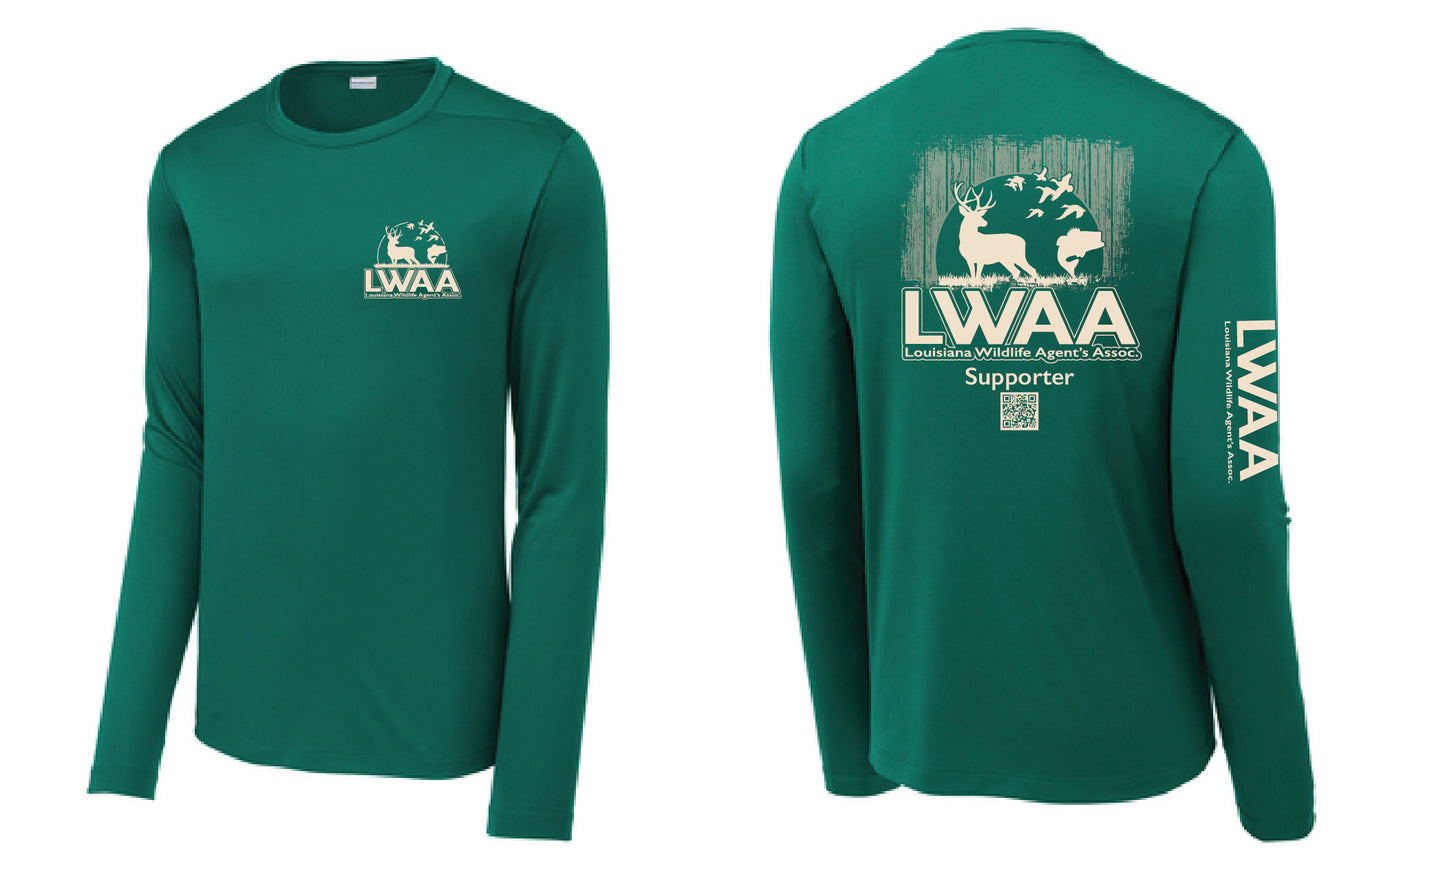 LWAA Supporter Dry Fit Long Sleeve (Hunting Scene)